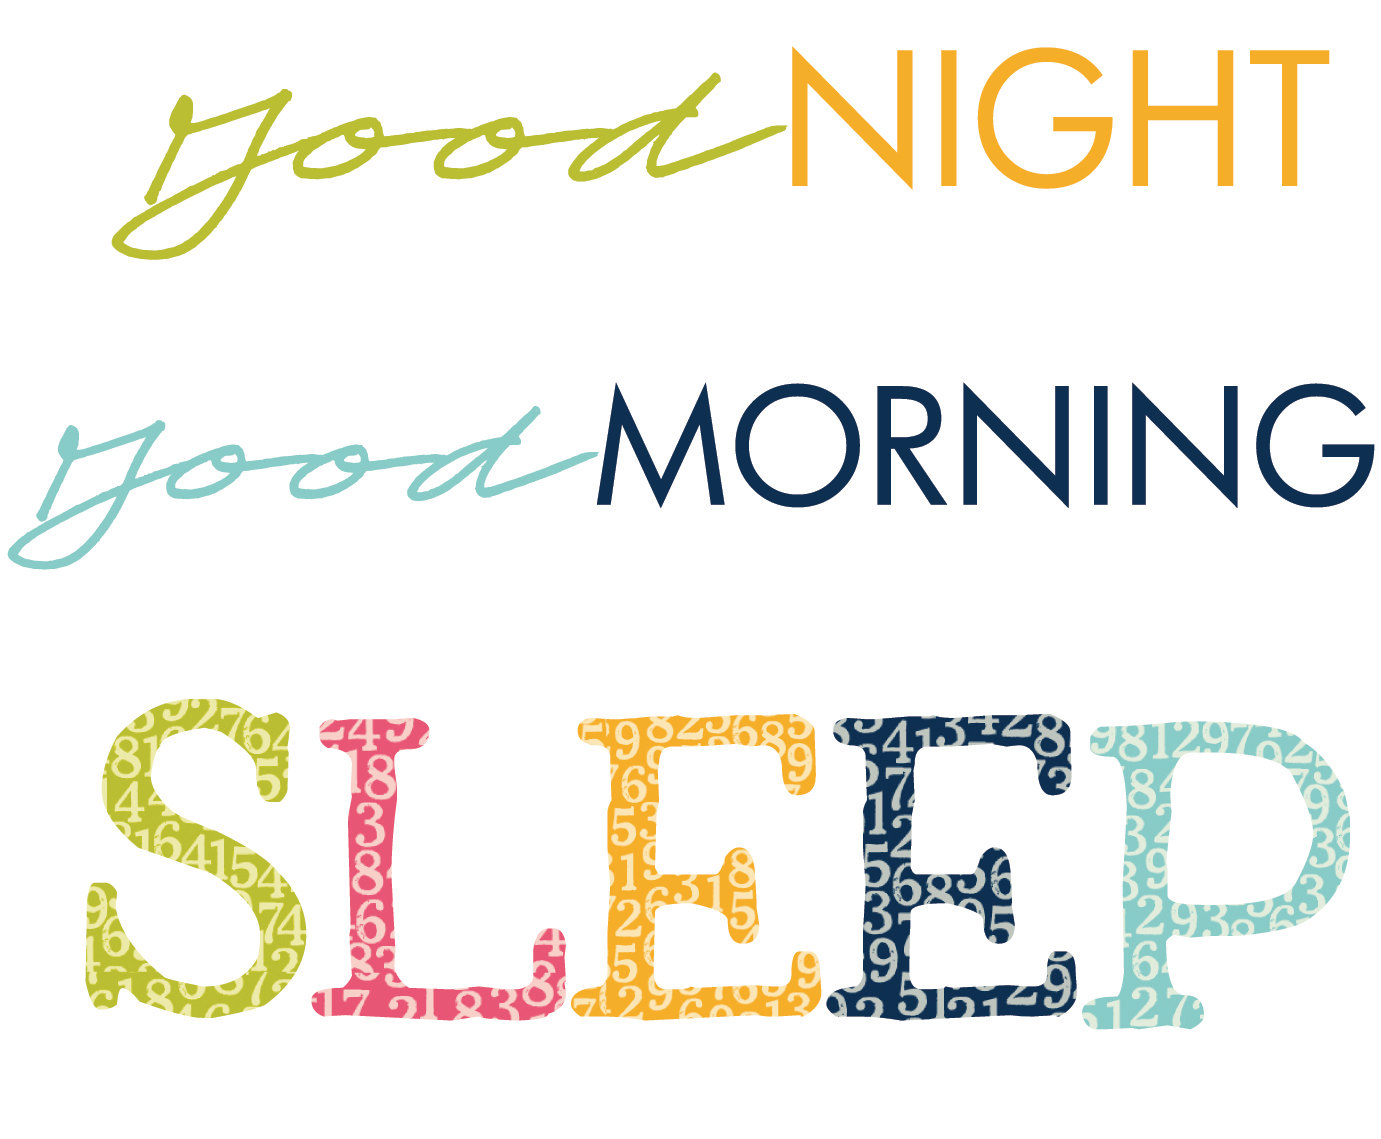 good night clipart free download - photo #31